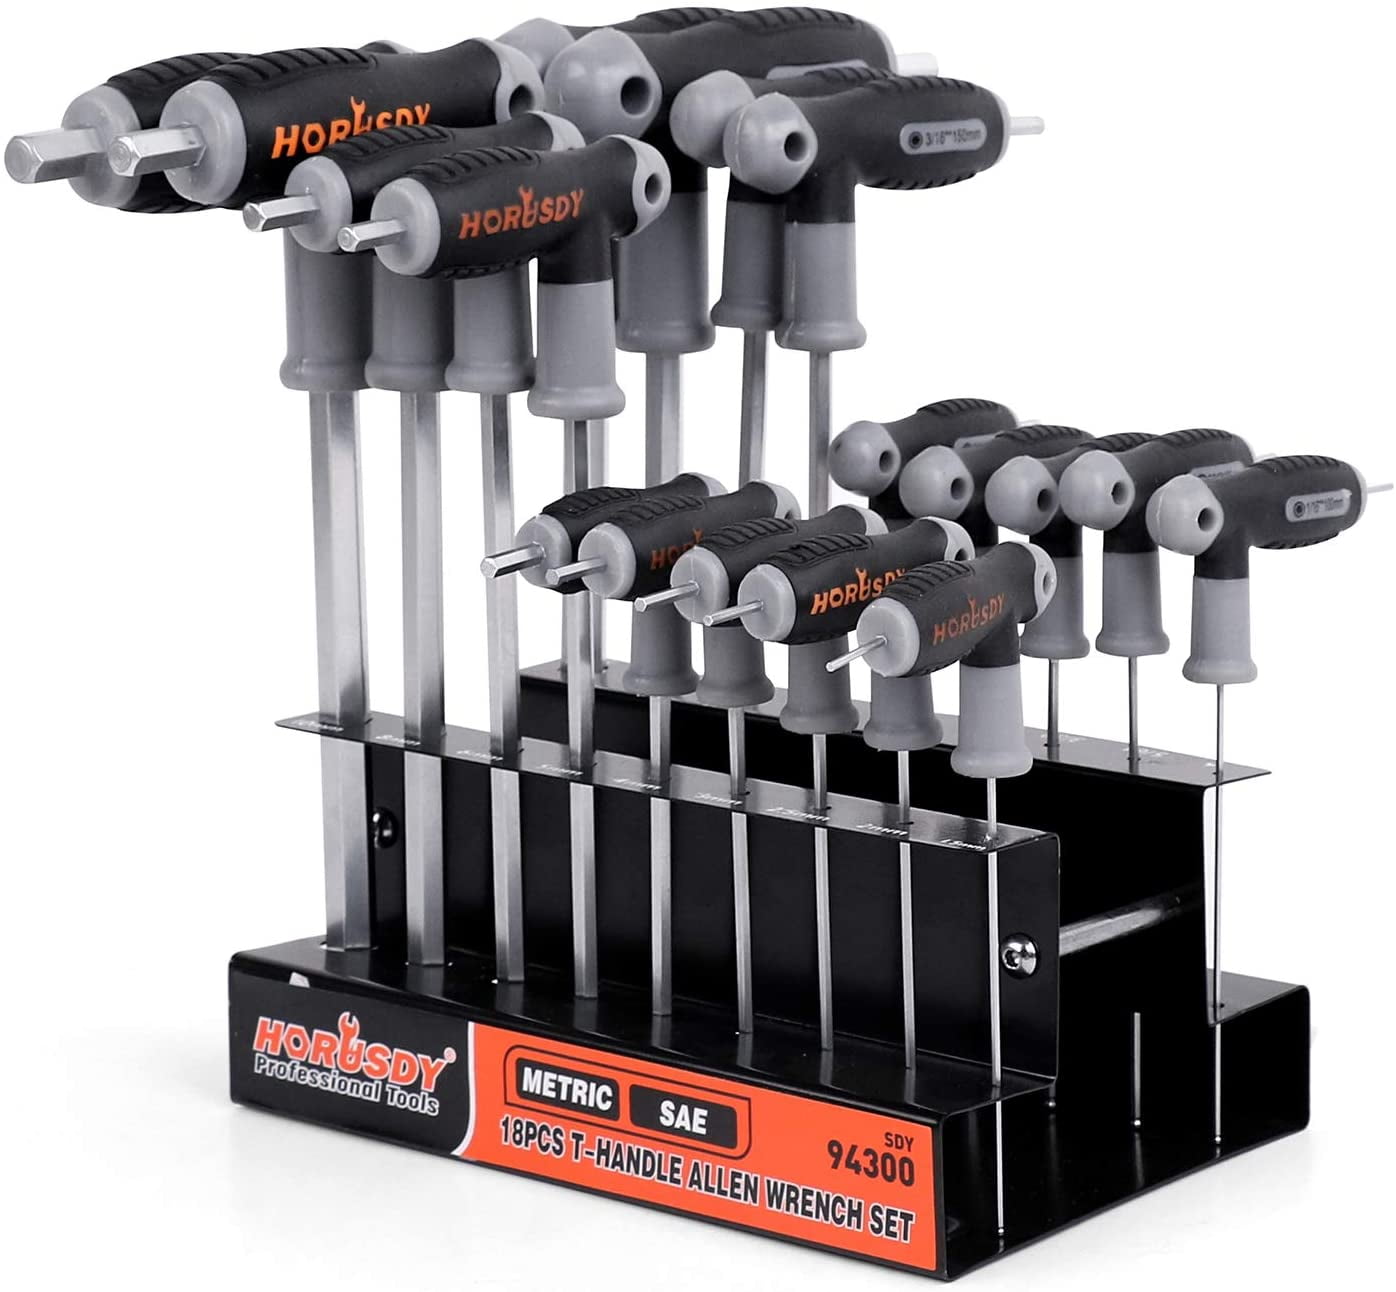 HORUSDY 18 Piece T-Handle Allen Wrench Set Inch / Metric Long Arm Ball End Hex  Key Wrench Set MM(1.5mm-10mm) SAE(1/16"-3/8") - Walmart.com